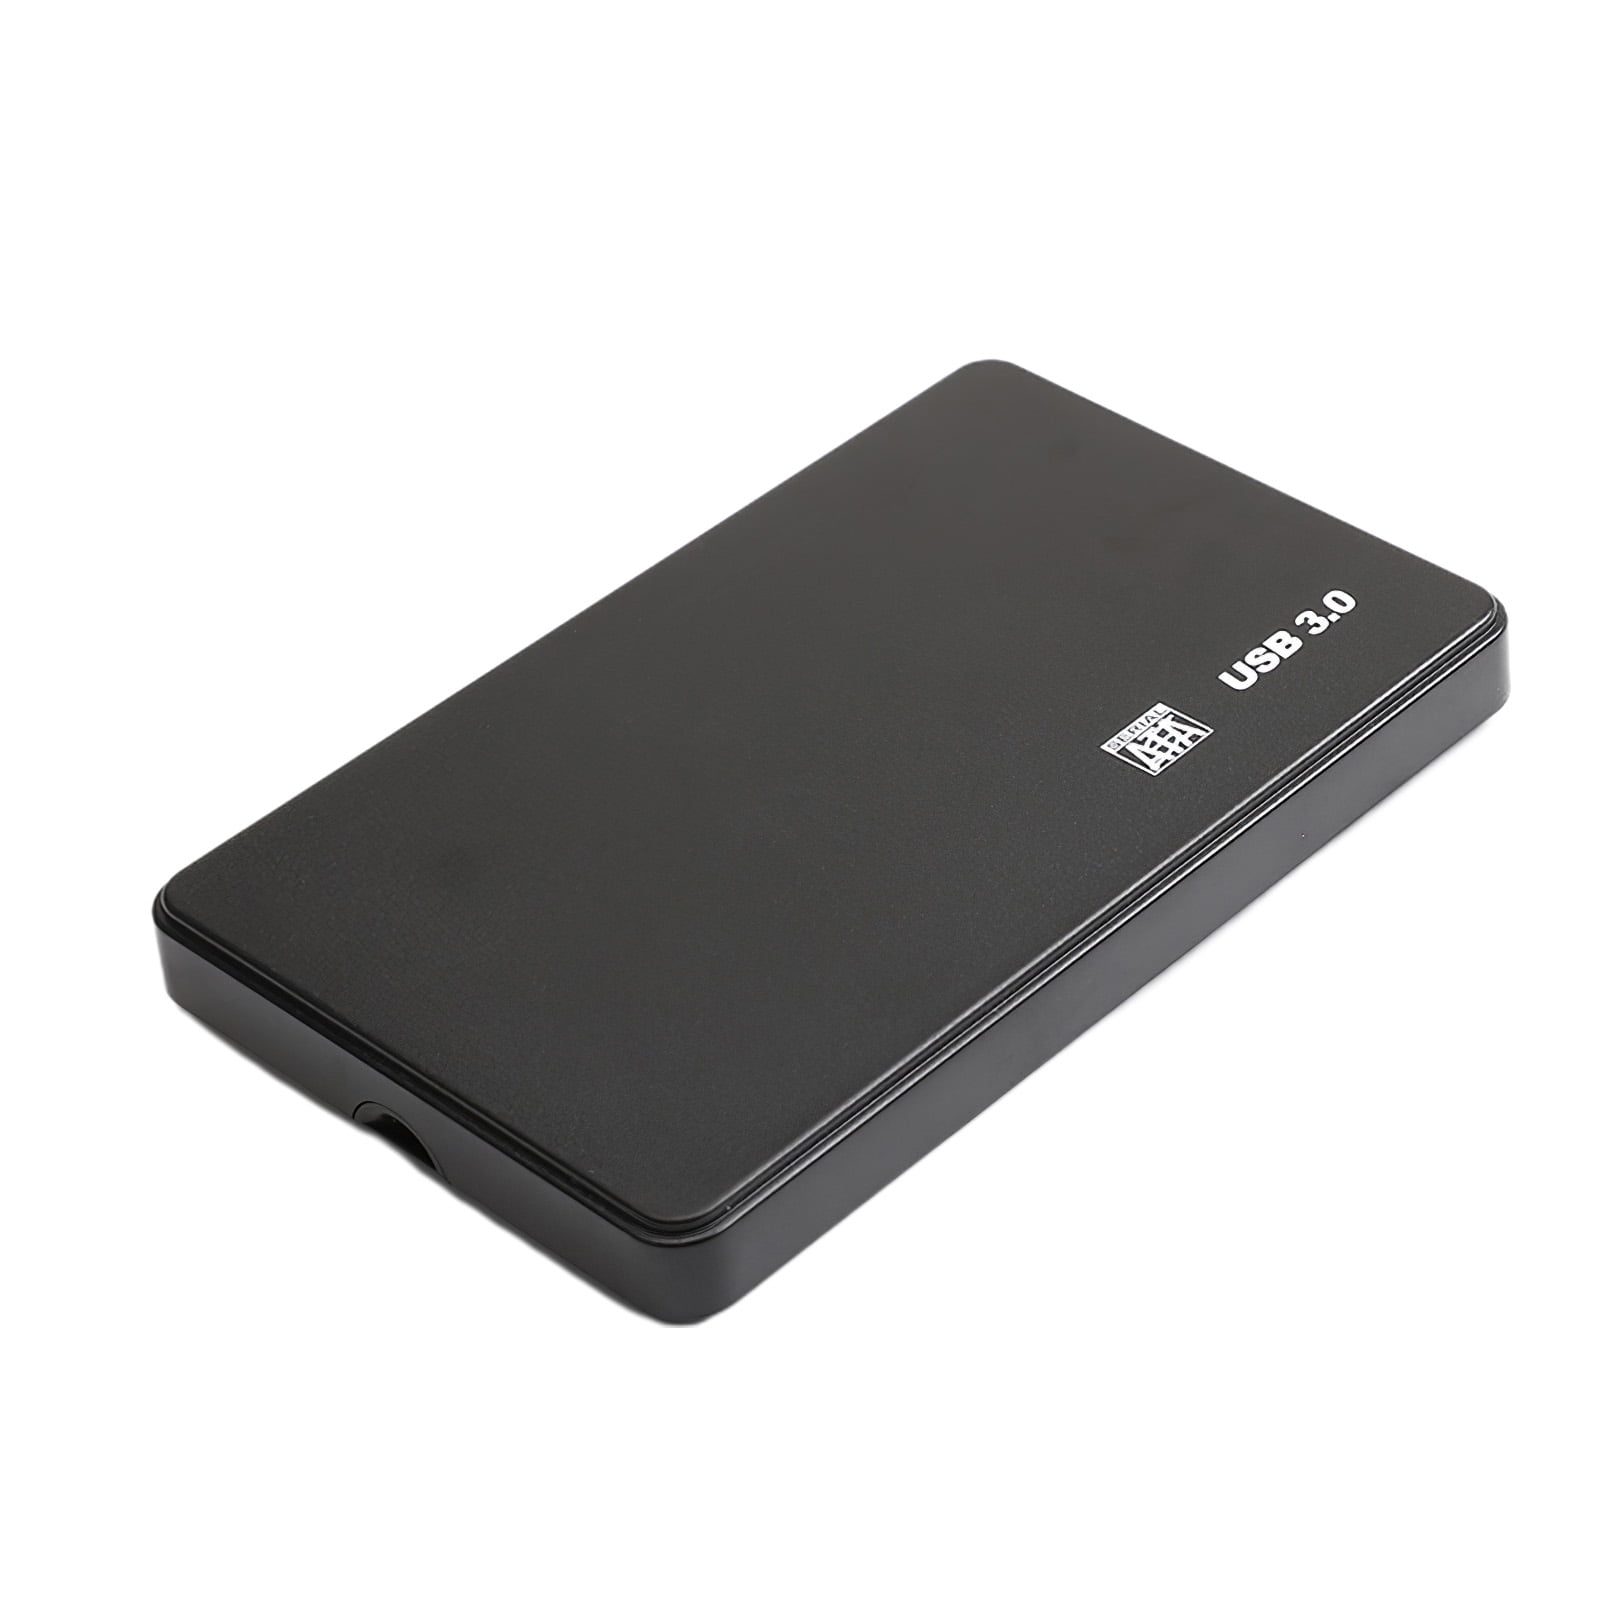 High-speed Transmission No Need to Change the System Multiple Capacity Options Capacity : 500GB , Color : Grey 1tb External Hard Drive Plug and Play Suitable for Desktop Notebook Computers